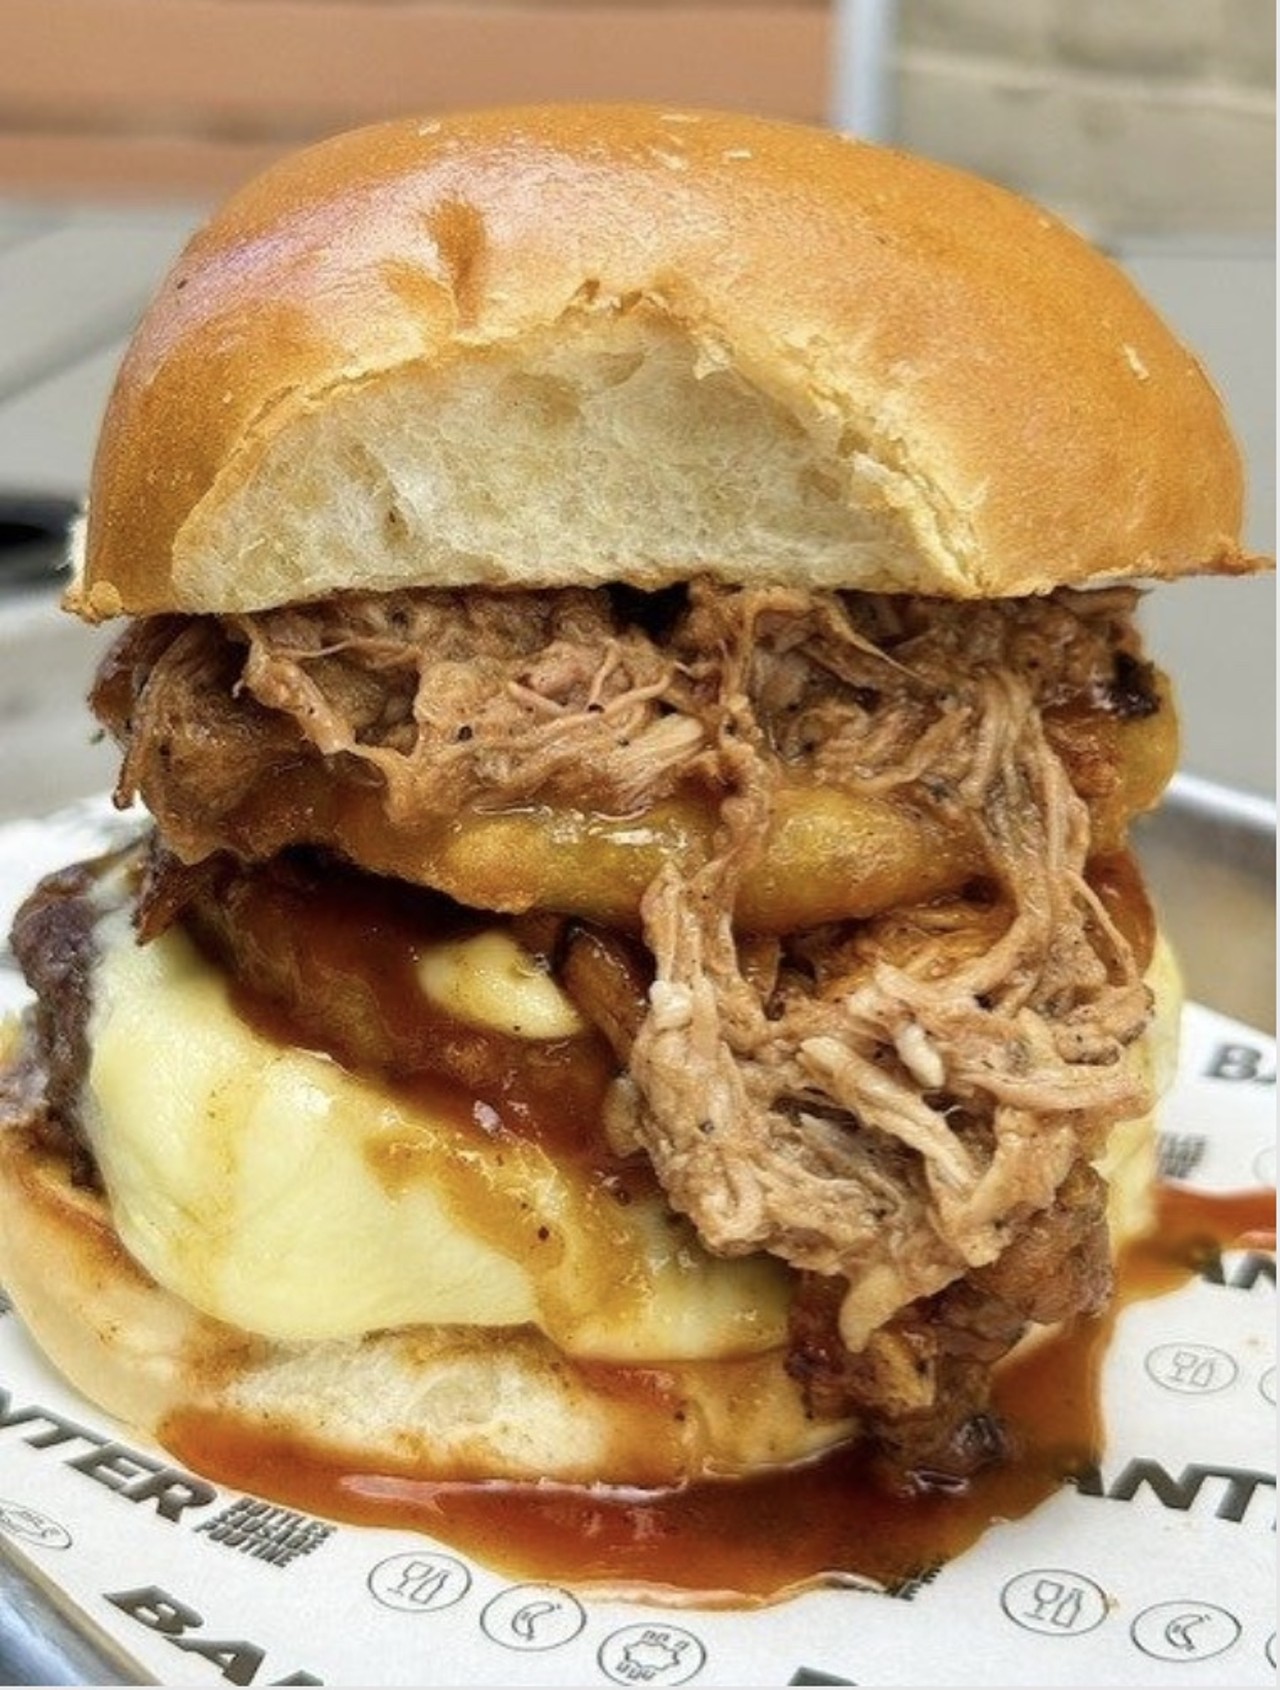 BANTER
Cowboy Burger: 1/3lb Burger Patty Topped With Coffee-Braised Pulled Pork, House-Made BBQ Sauce, and an Onion Ring. (Gluten free option available)